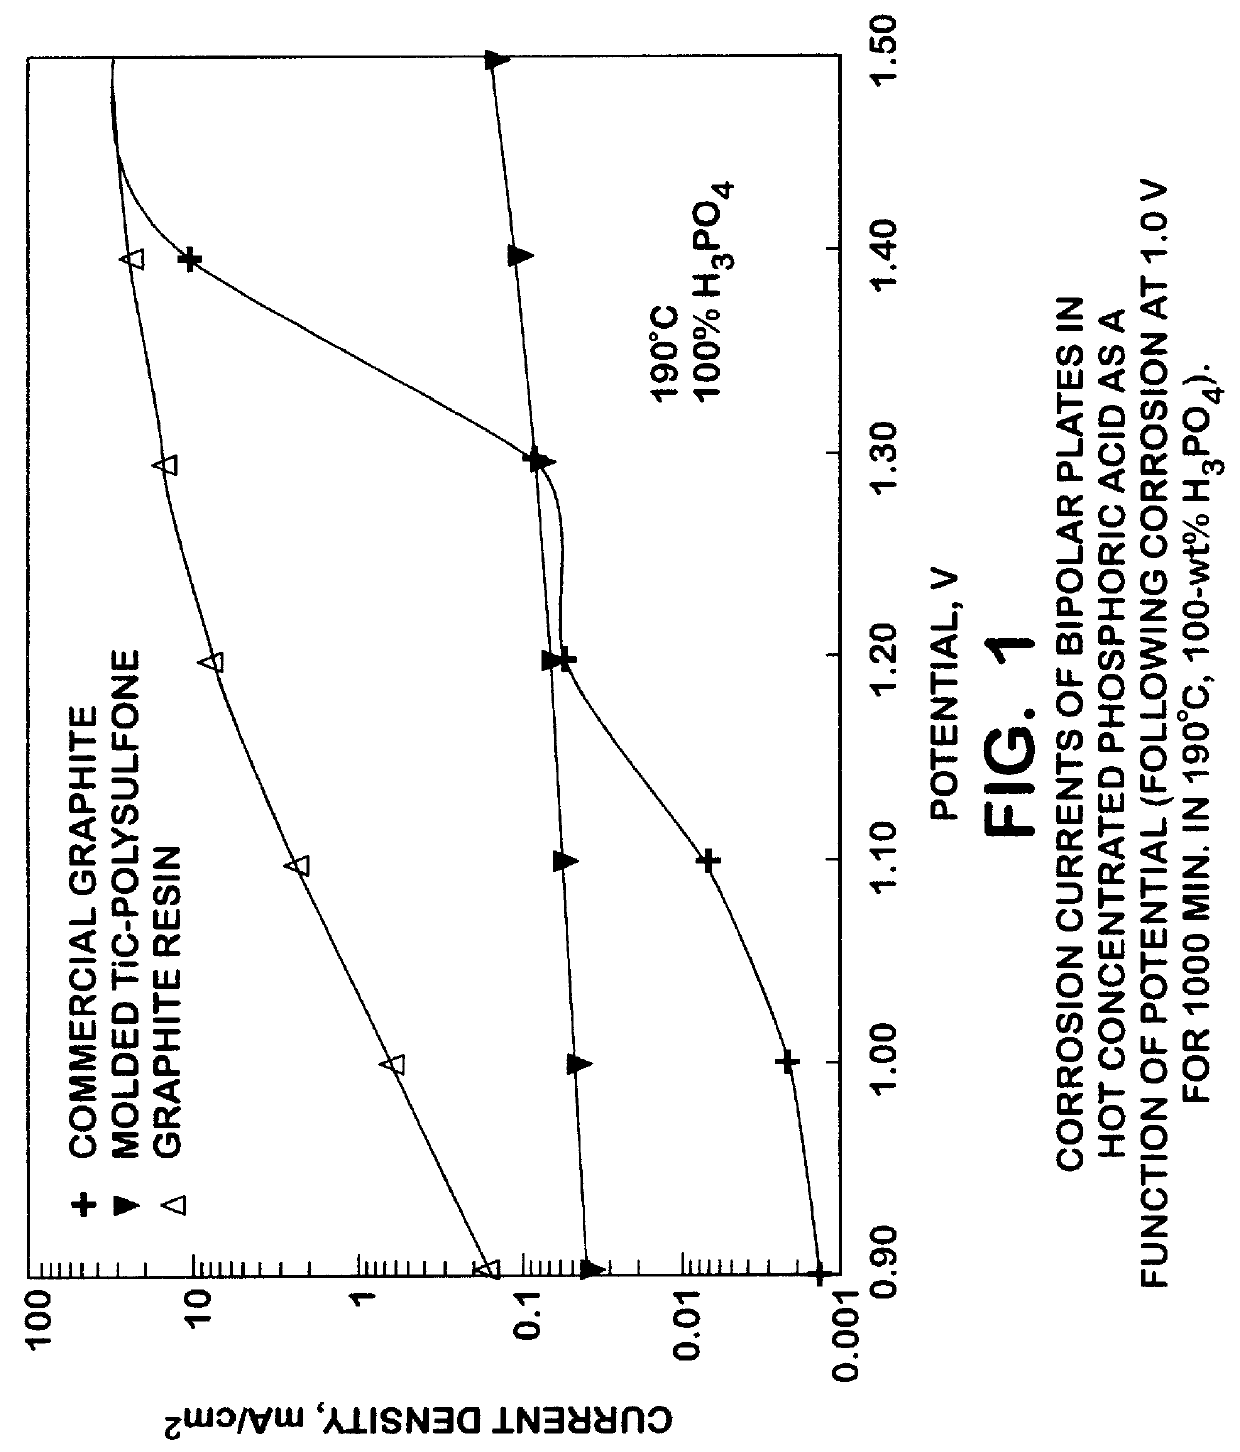 Titanium carbide bipolar plate for electrochemical devices